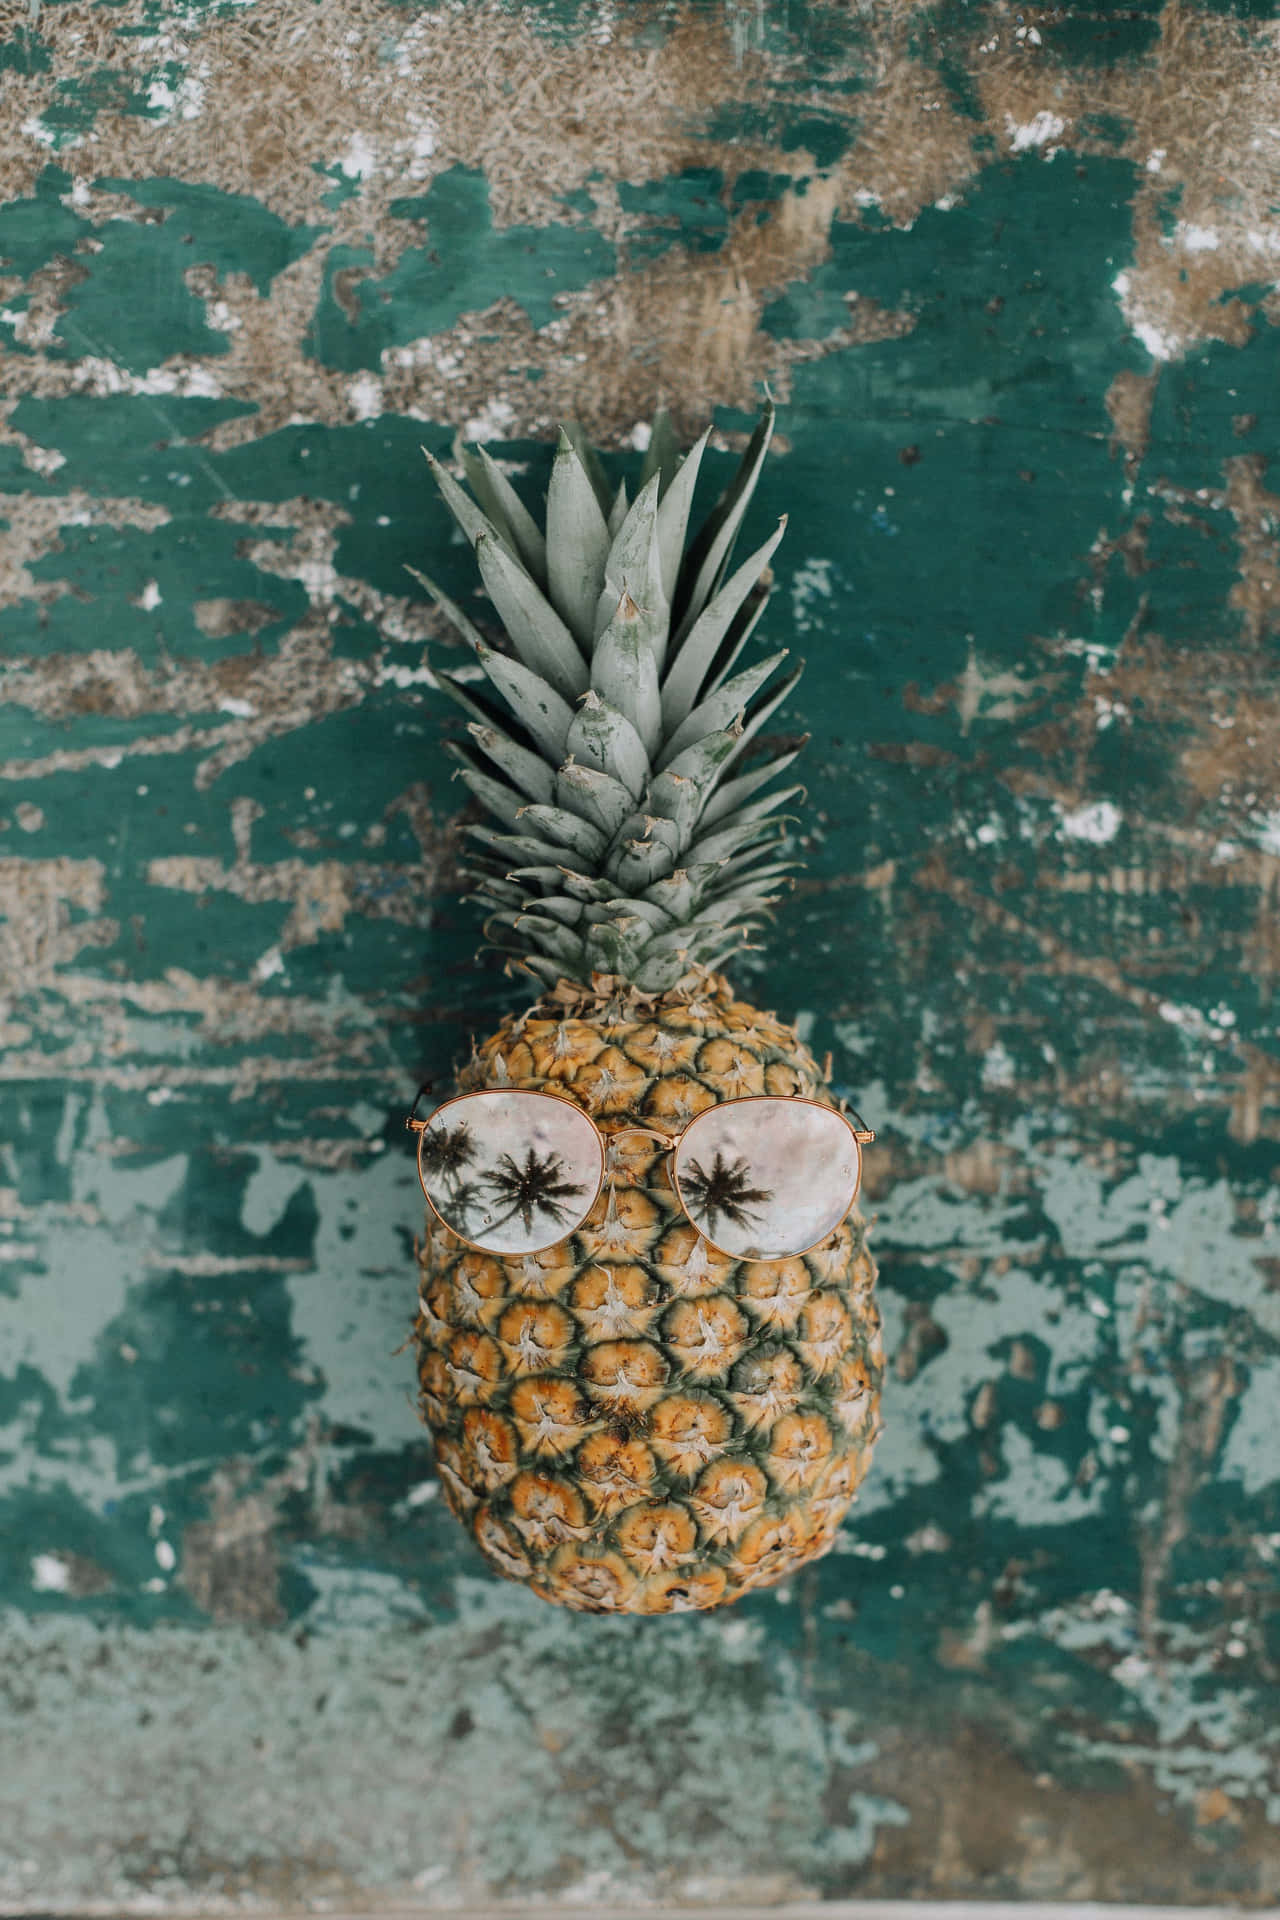 Tropical Delights - Enjoy a delicious pineapple fruit